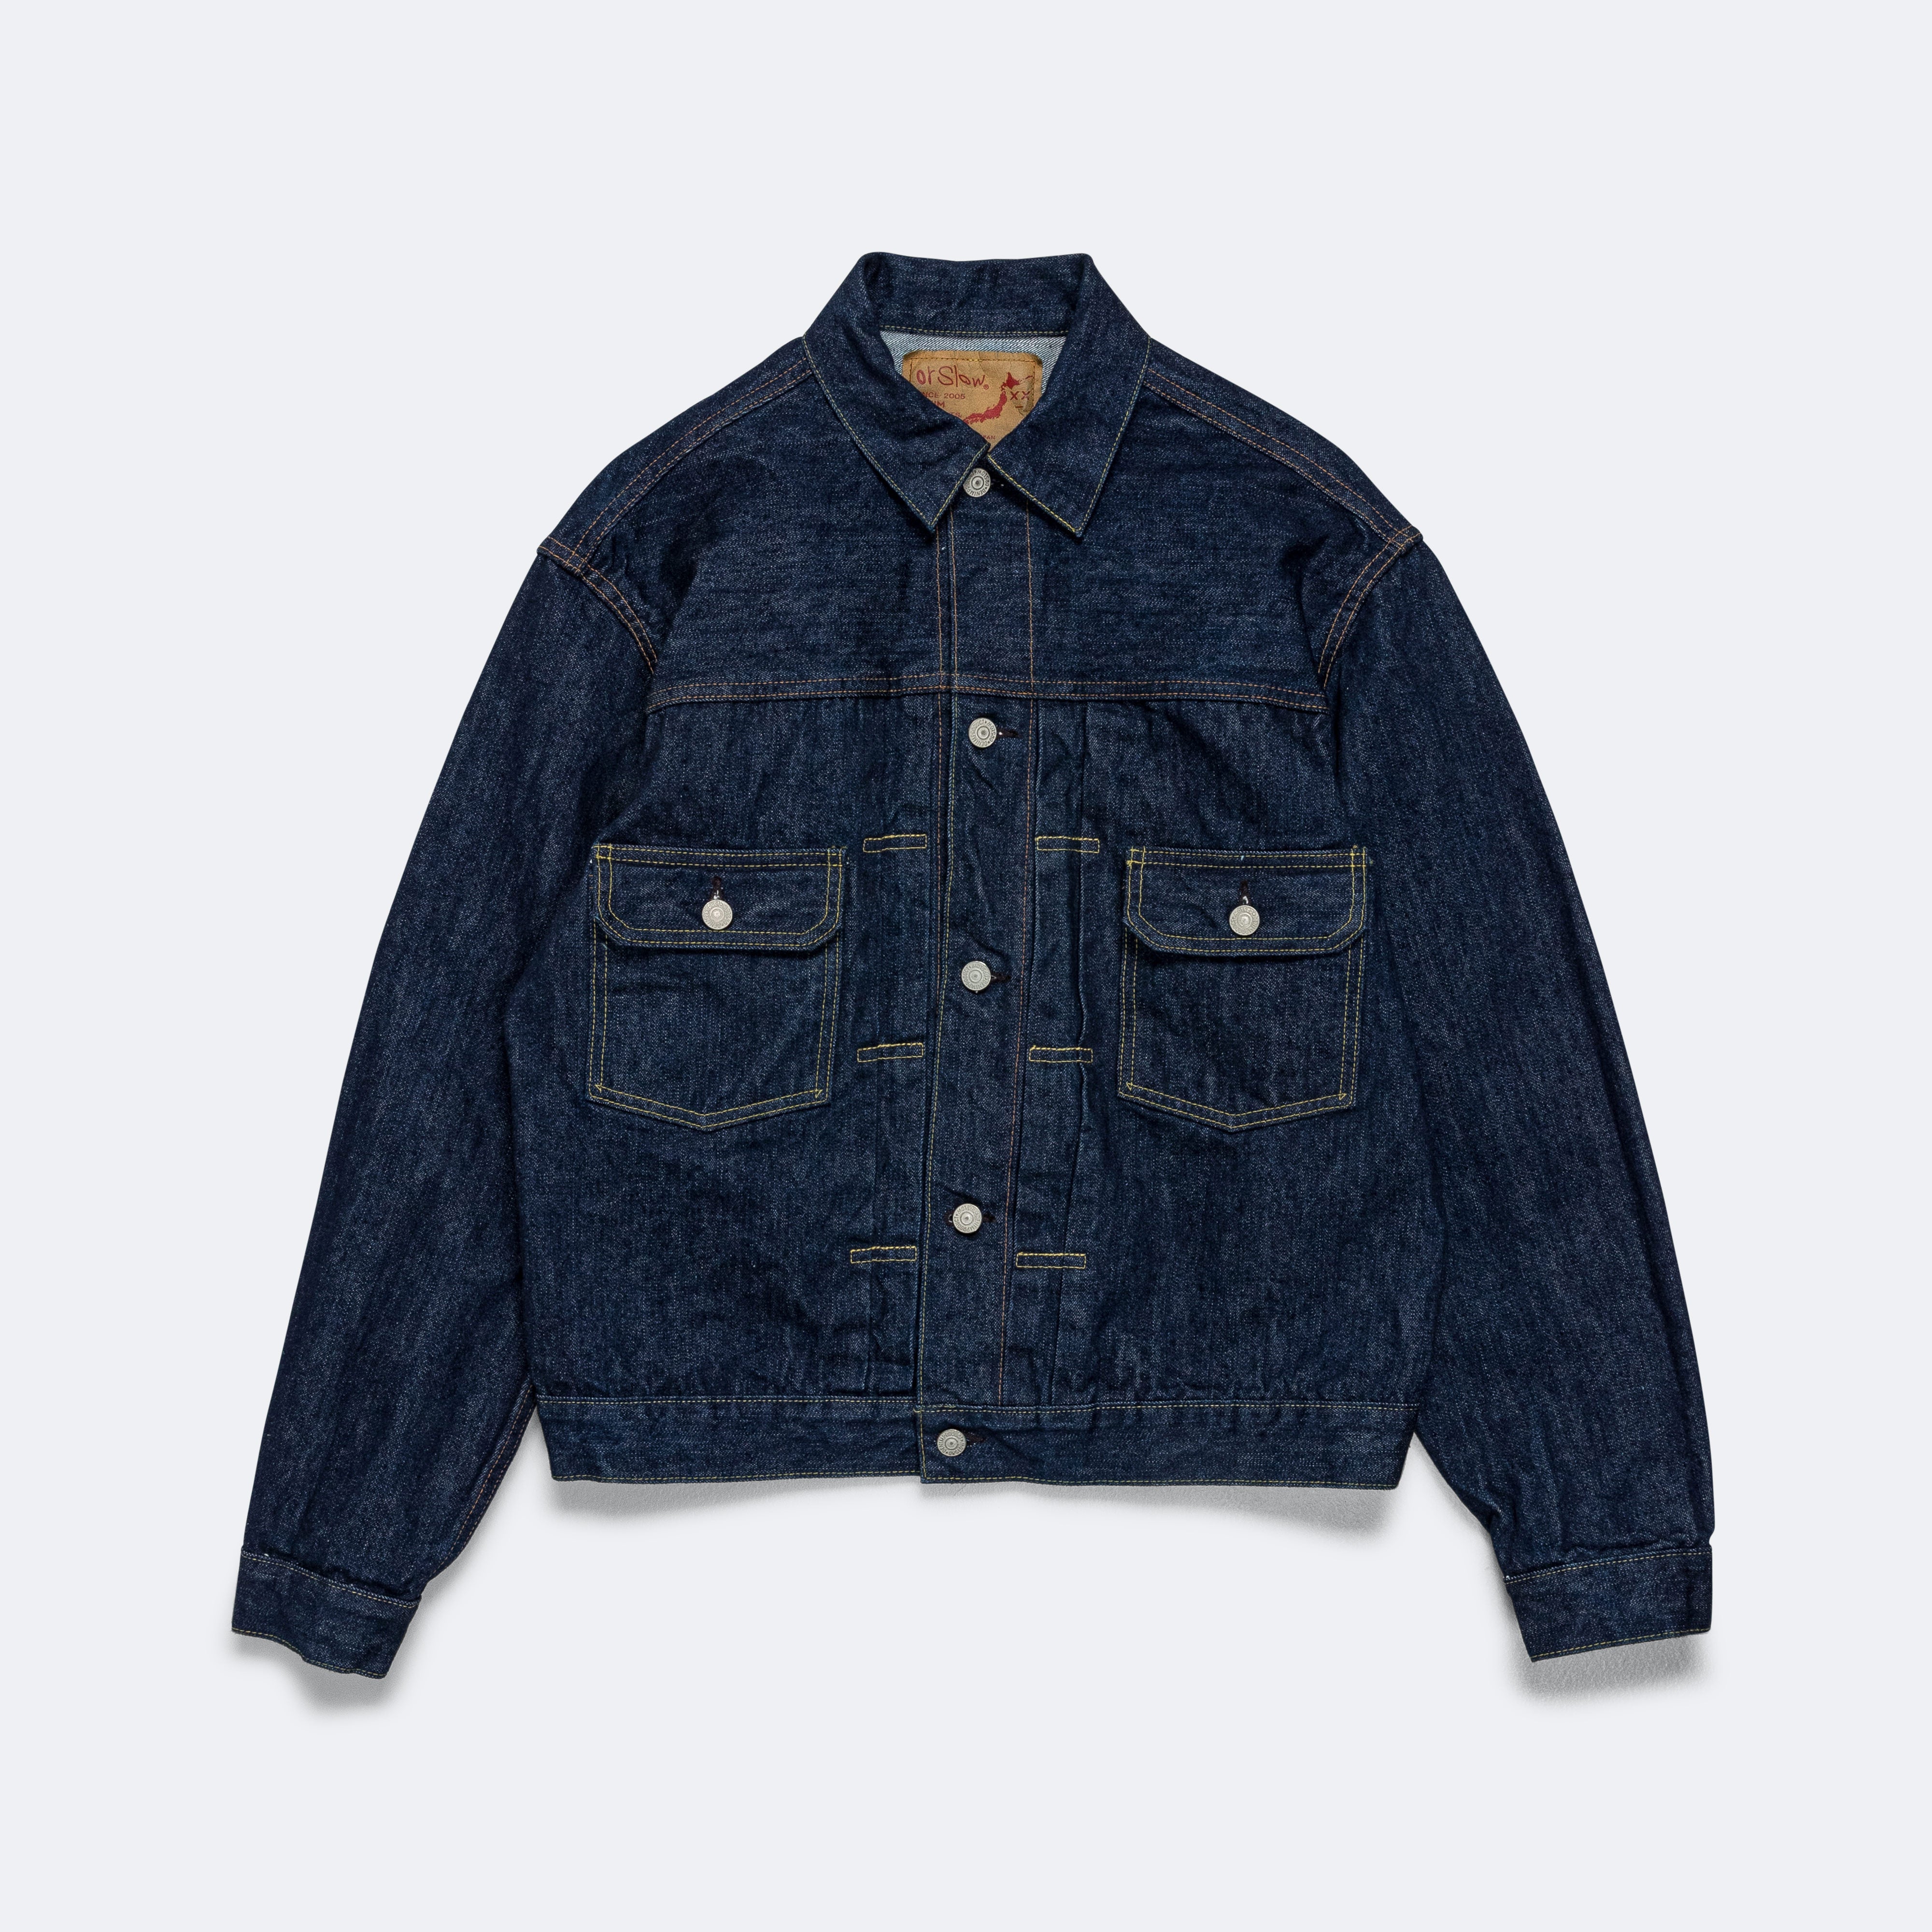 orSlow Type 2 Denim Jacket - One Wash | Up There | UP THERE